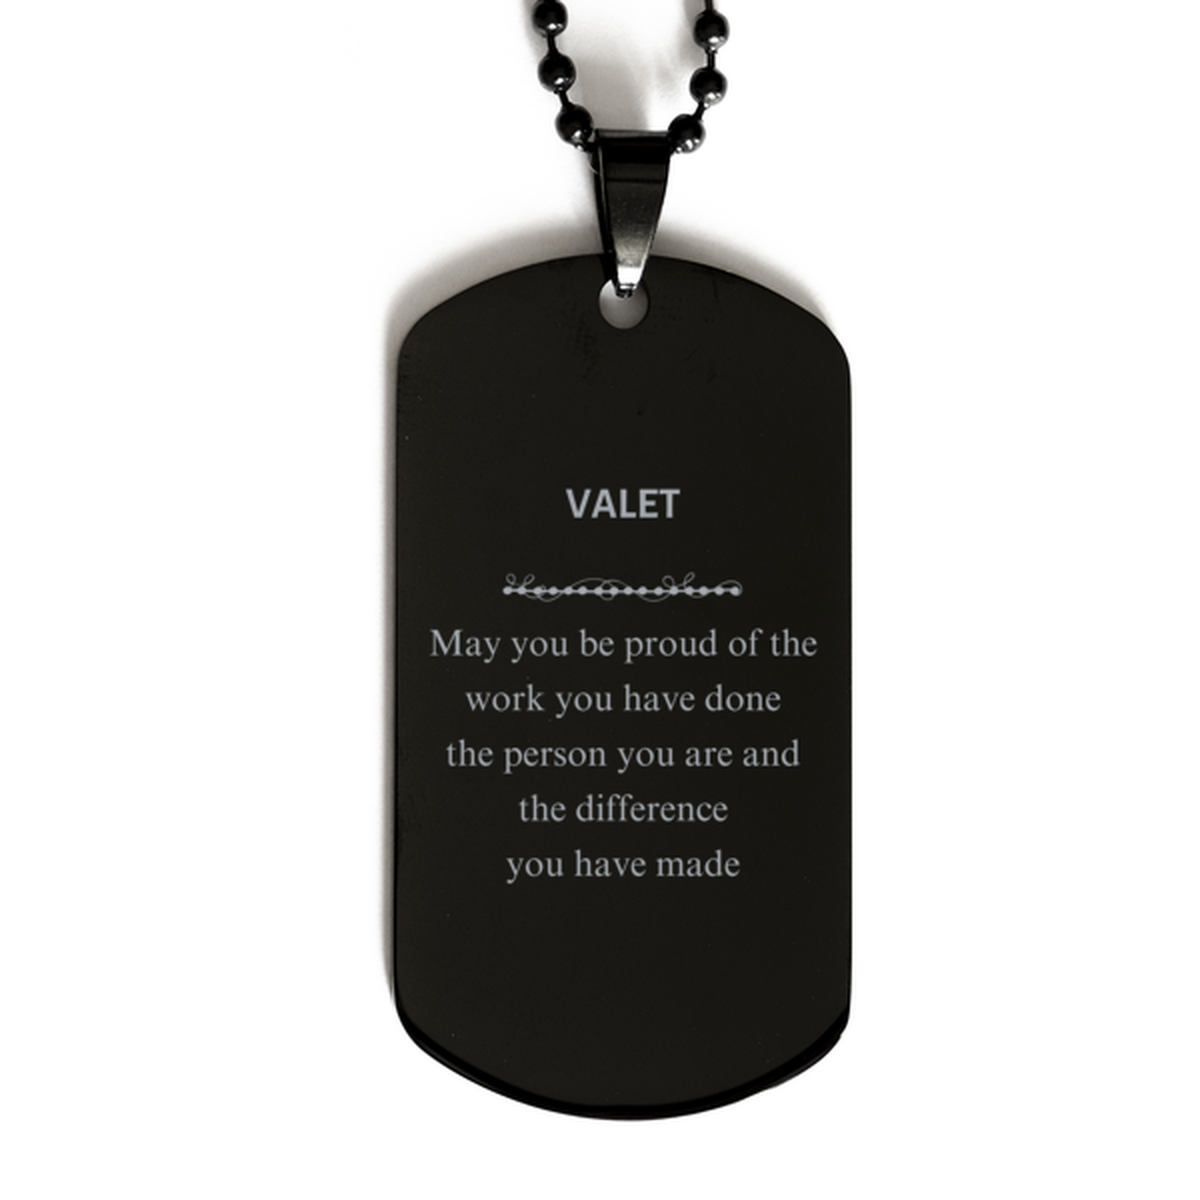 Valet May you be proud of the work you have done, Retirement Valet Black Dog Tag for Colleague Appreciation Gifts Amazing for Valet